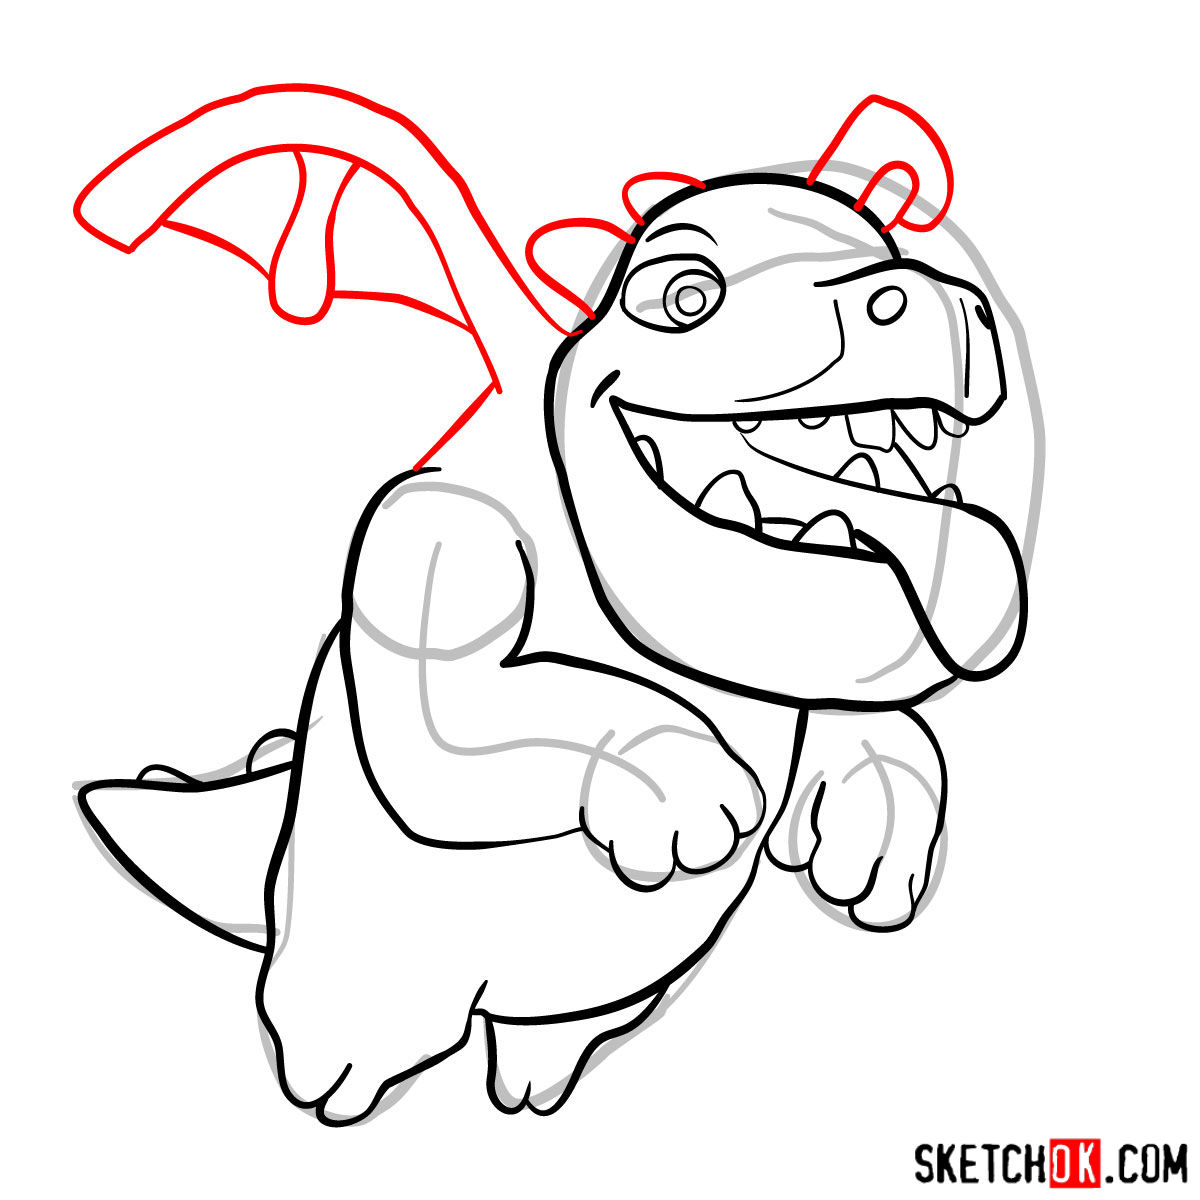 How to draw Baby Dragon from Clash of Clans - step 08